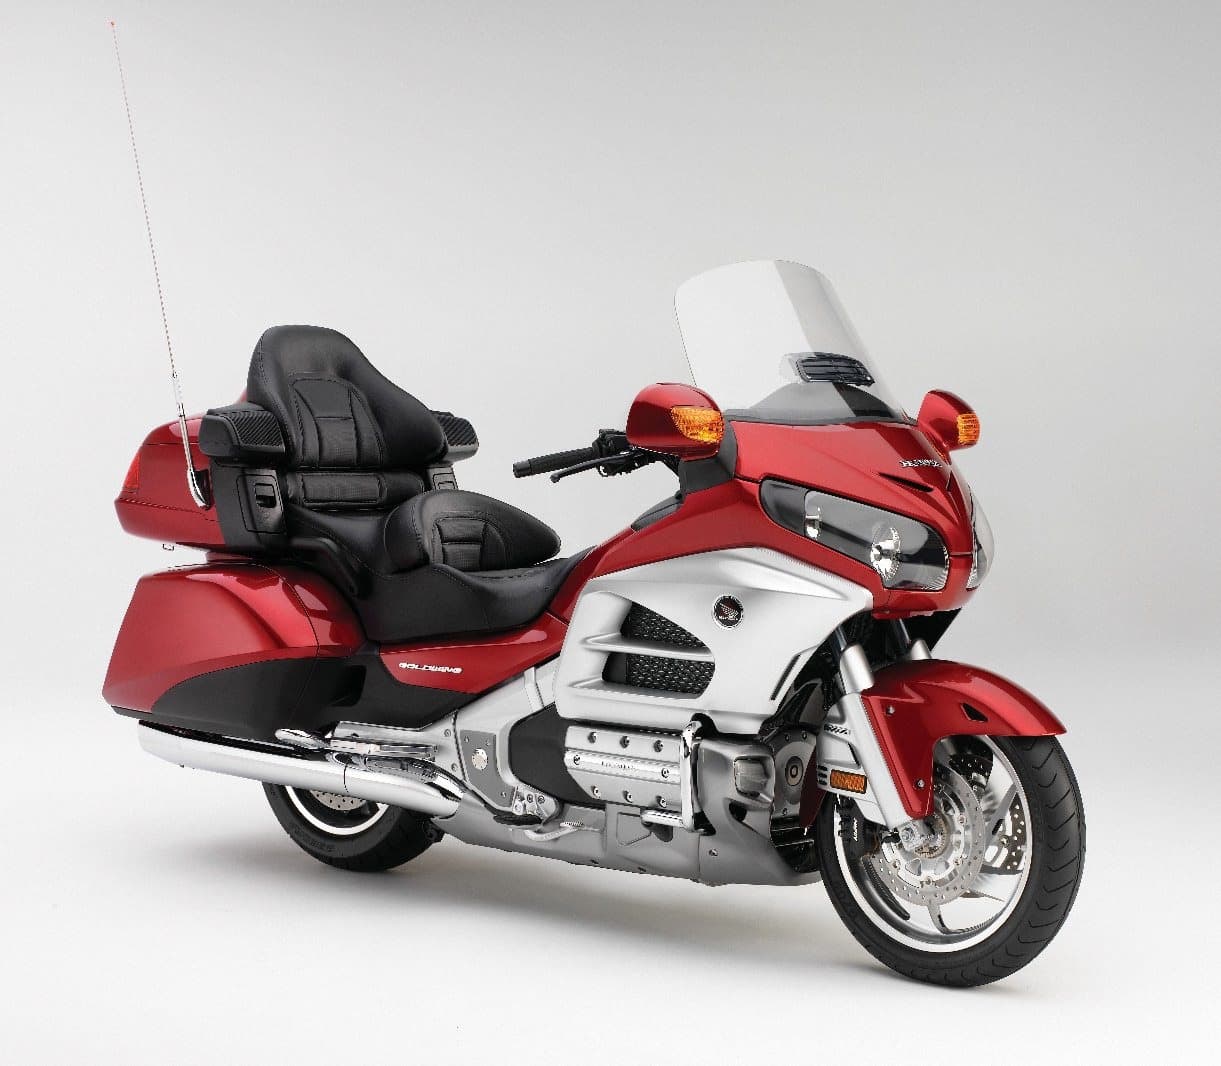 2012 Honda Gold Wing red and silver